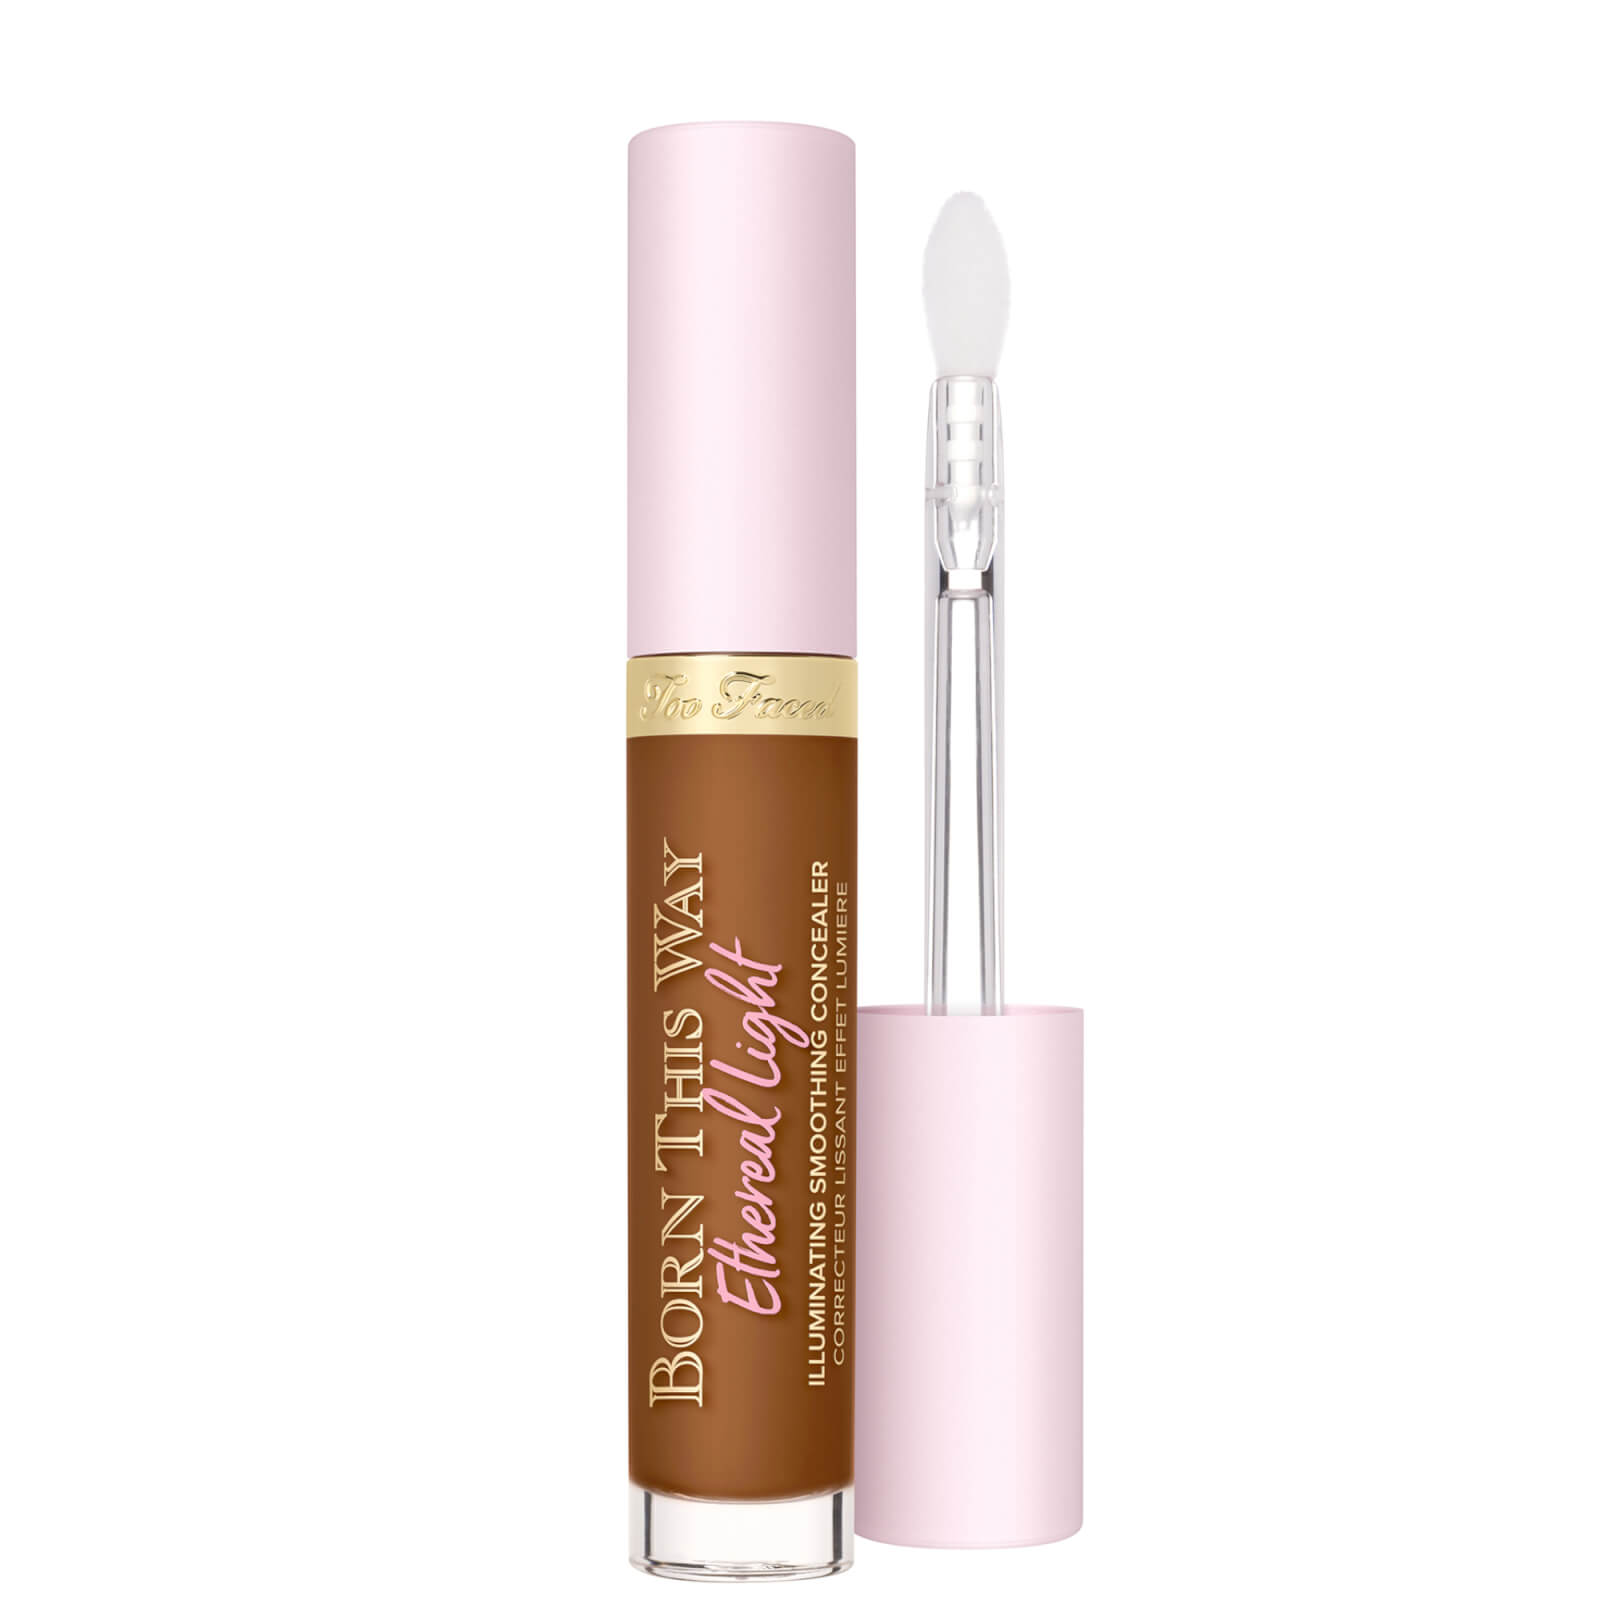 Too Faced Born This Way Ethereal Light Illuminating Smoothing Concealer 15ml (Various Shades) - Choc